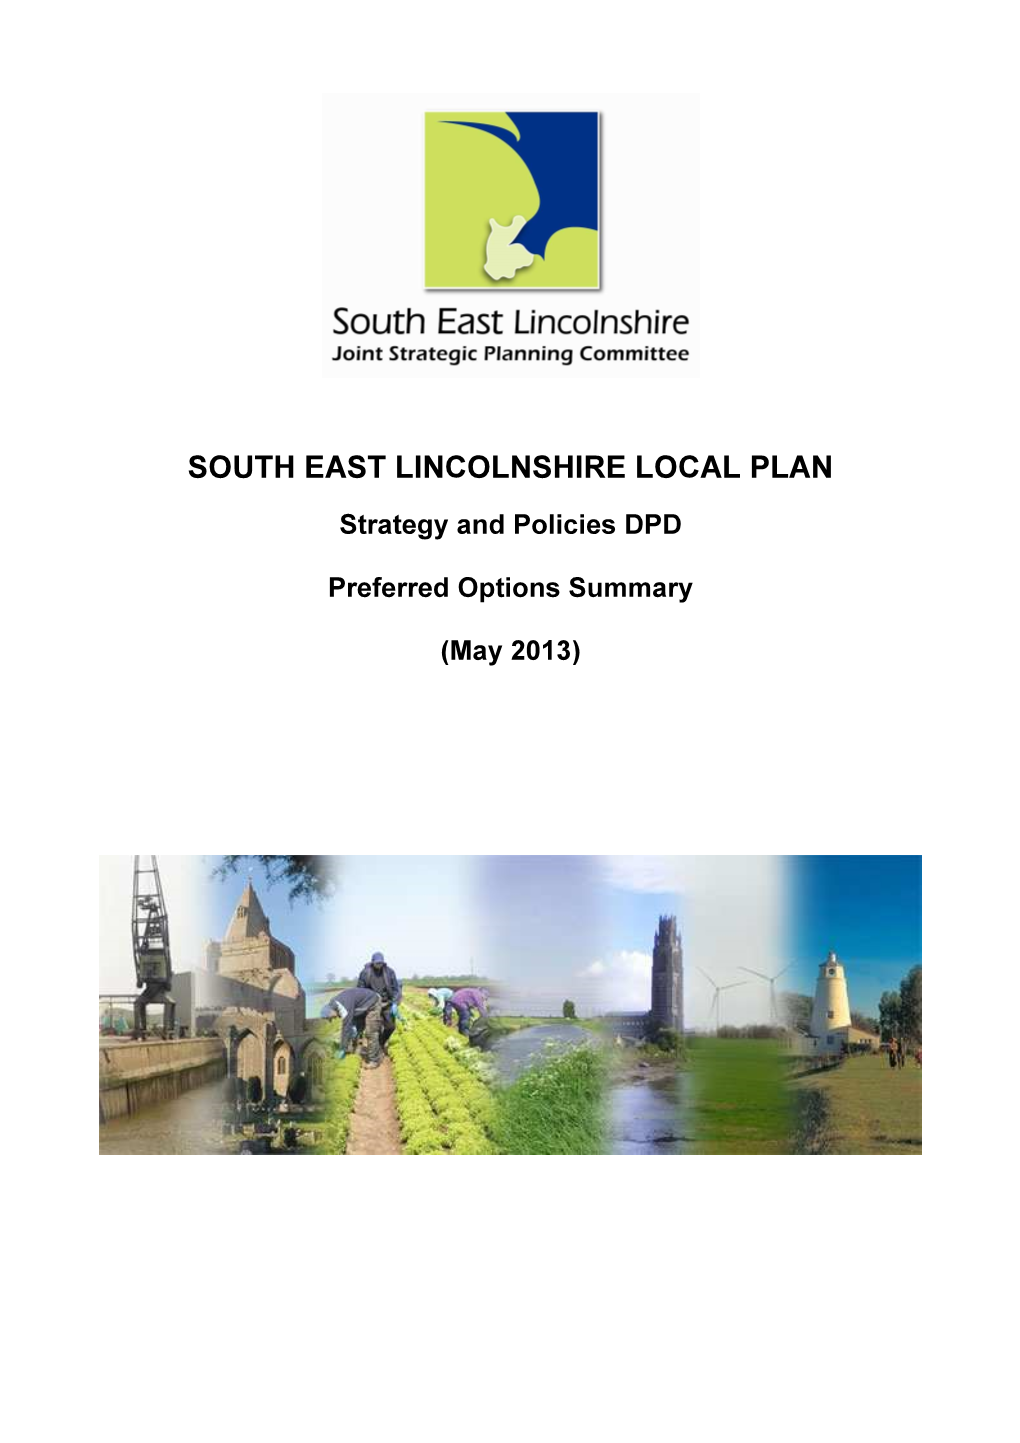 South East Lincolnshire Local Plan